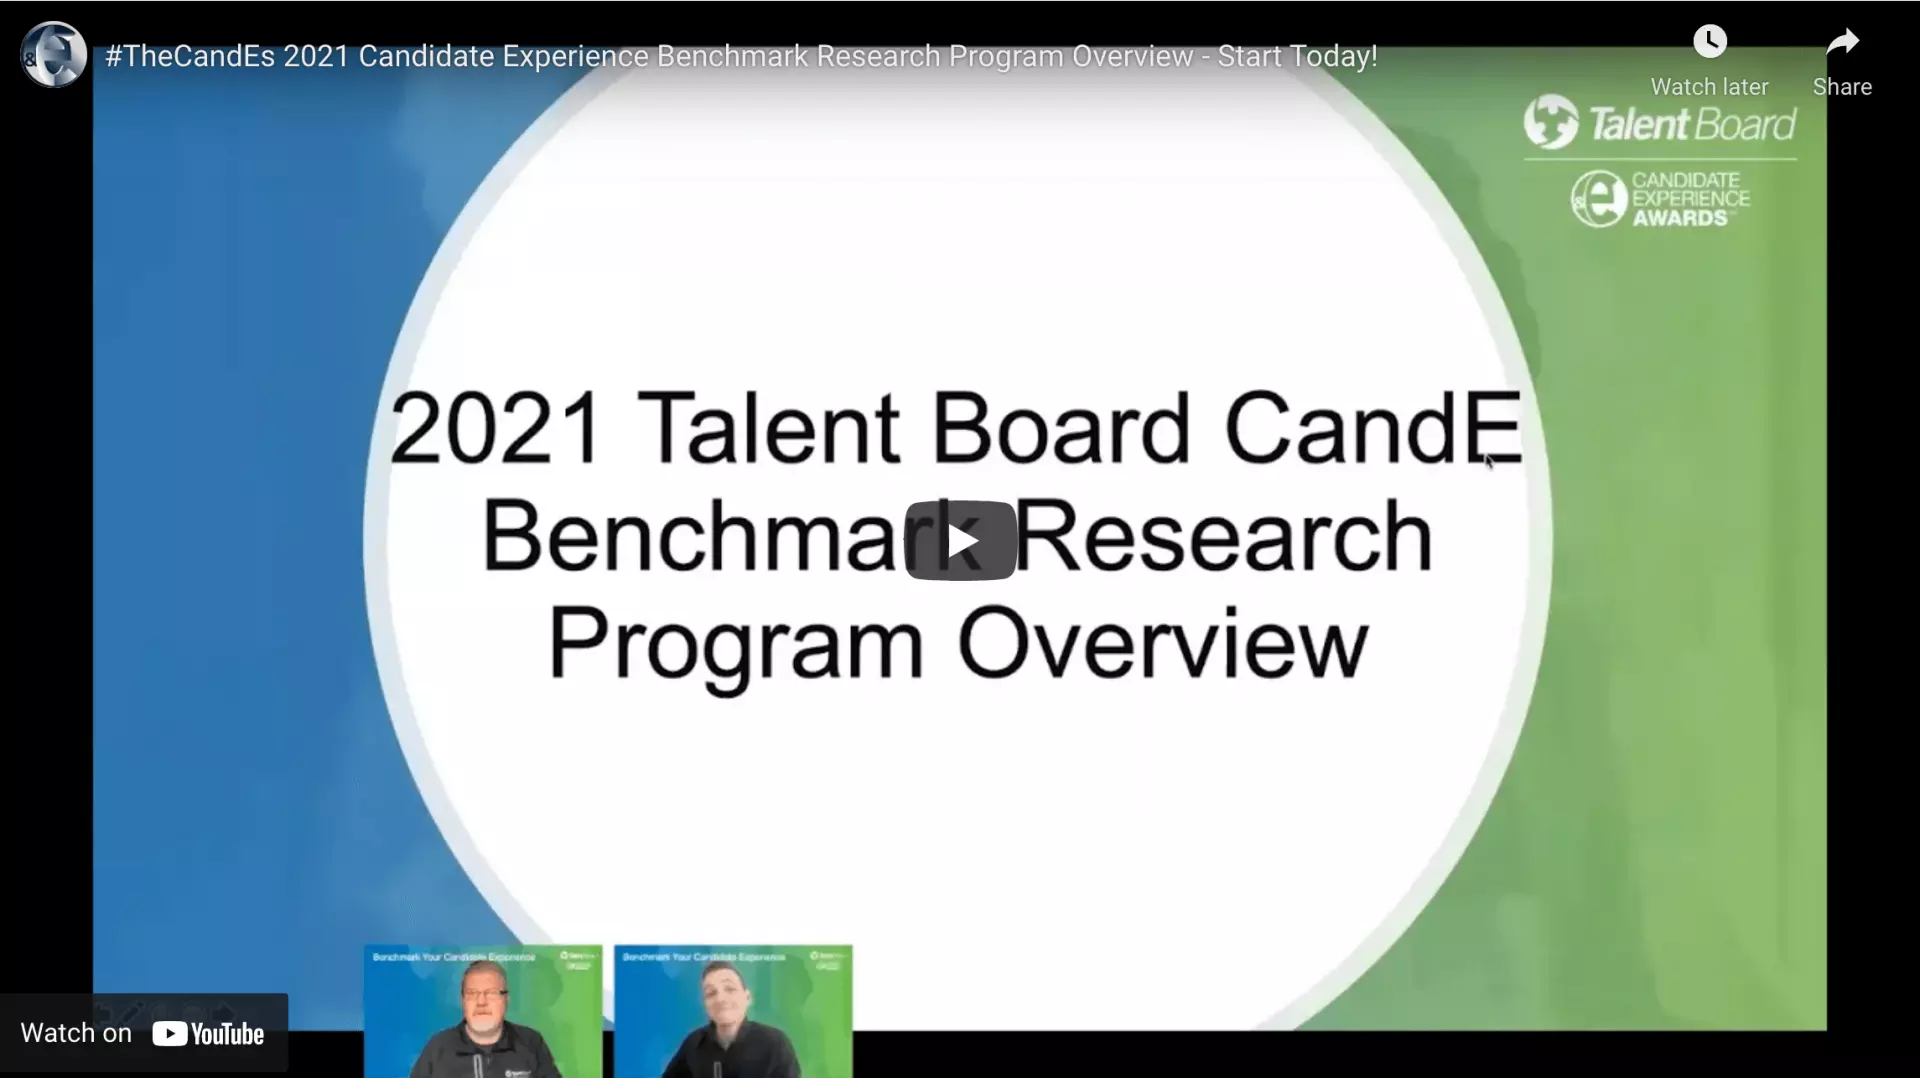 CandE_Benchmark_Research_Program_Overview.png